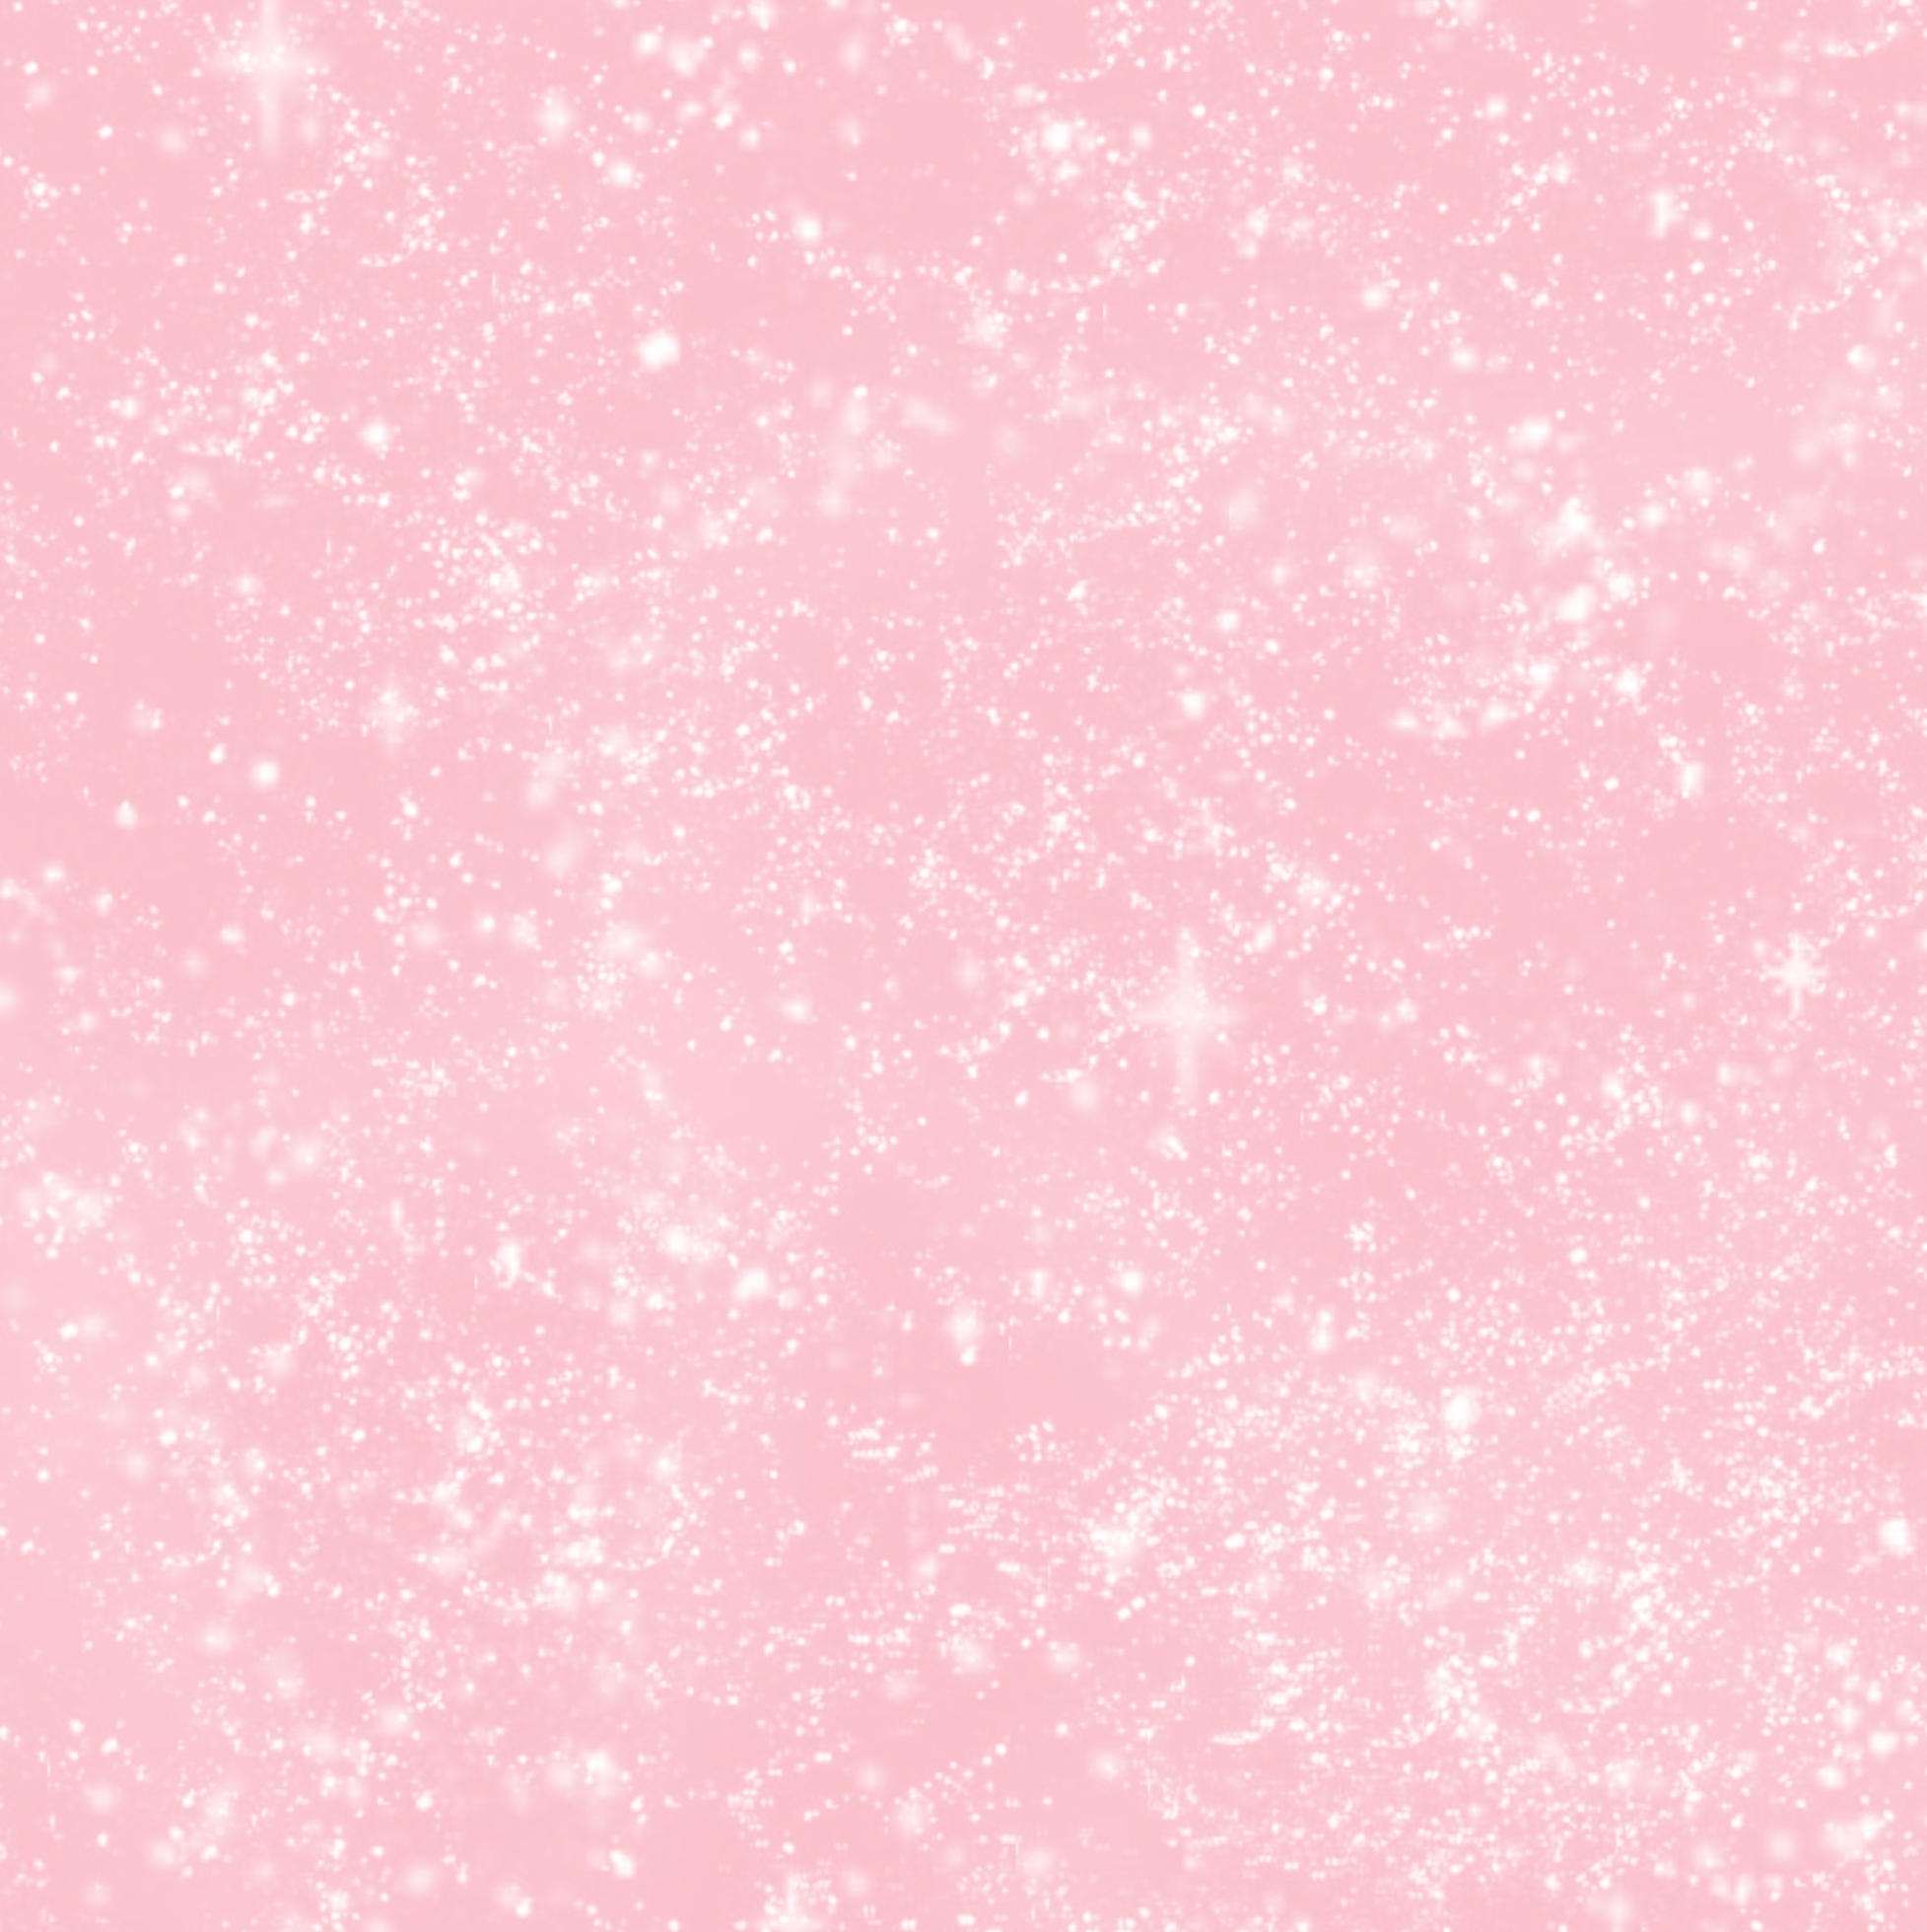 Simple Light Pink Background image gallery 1955x1960